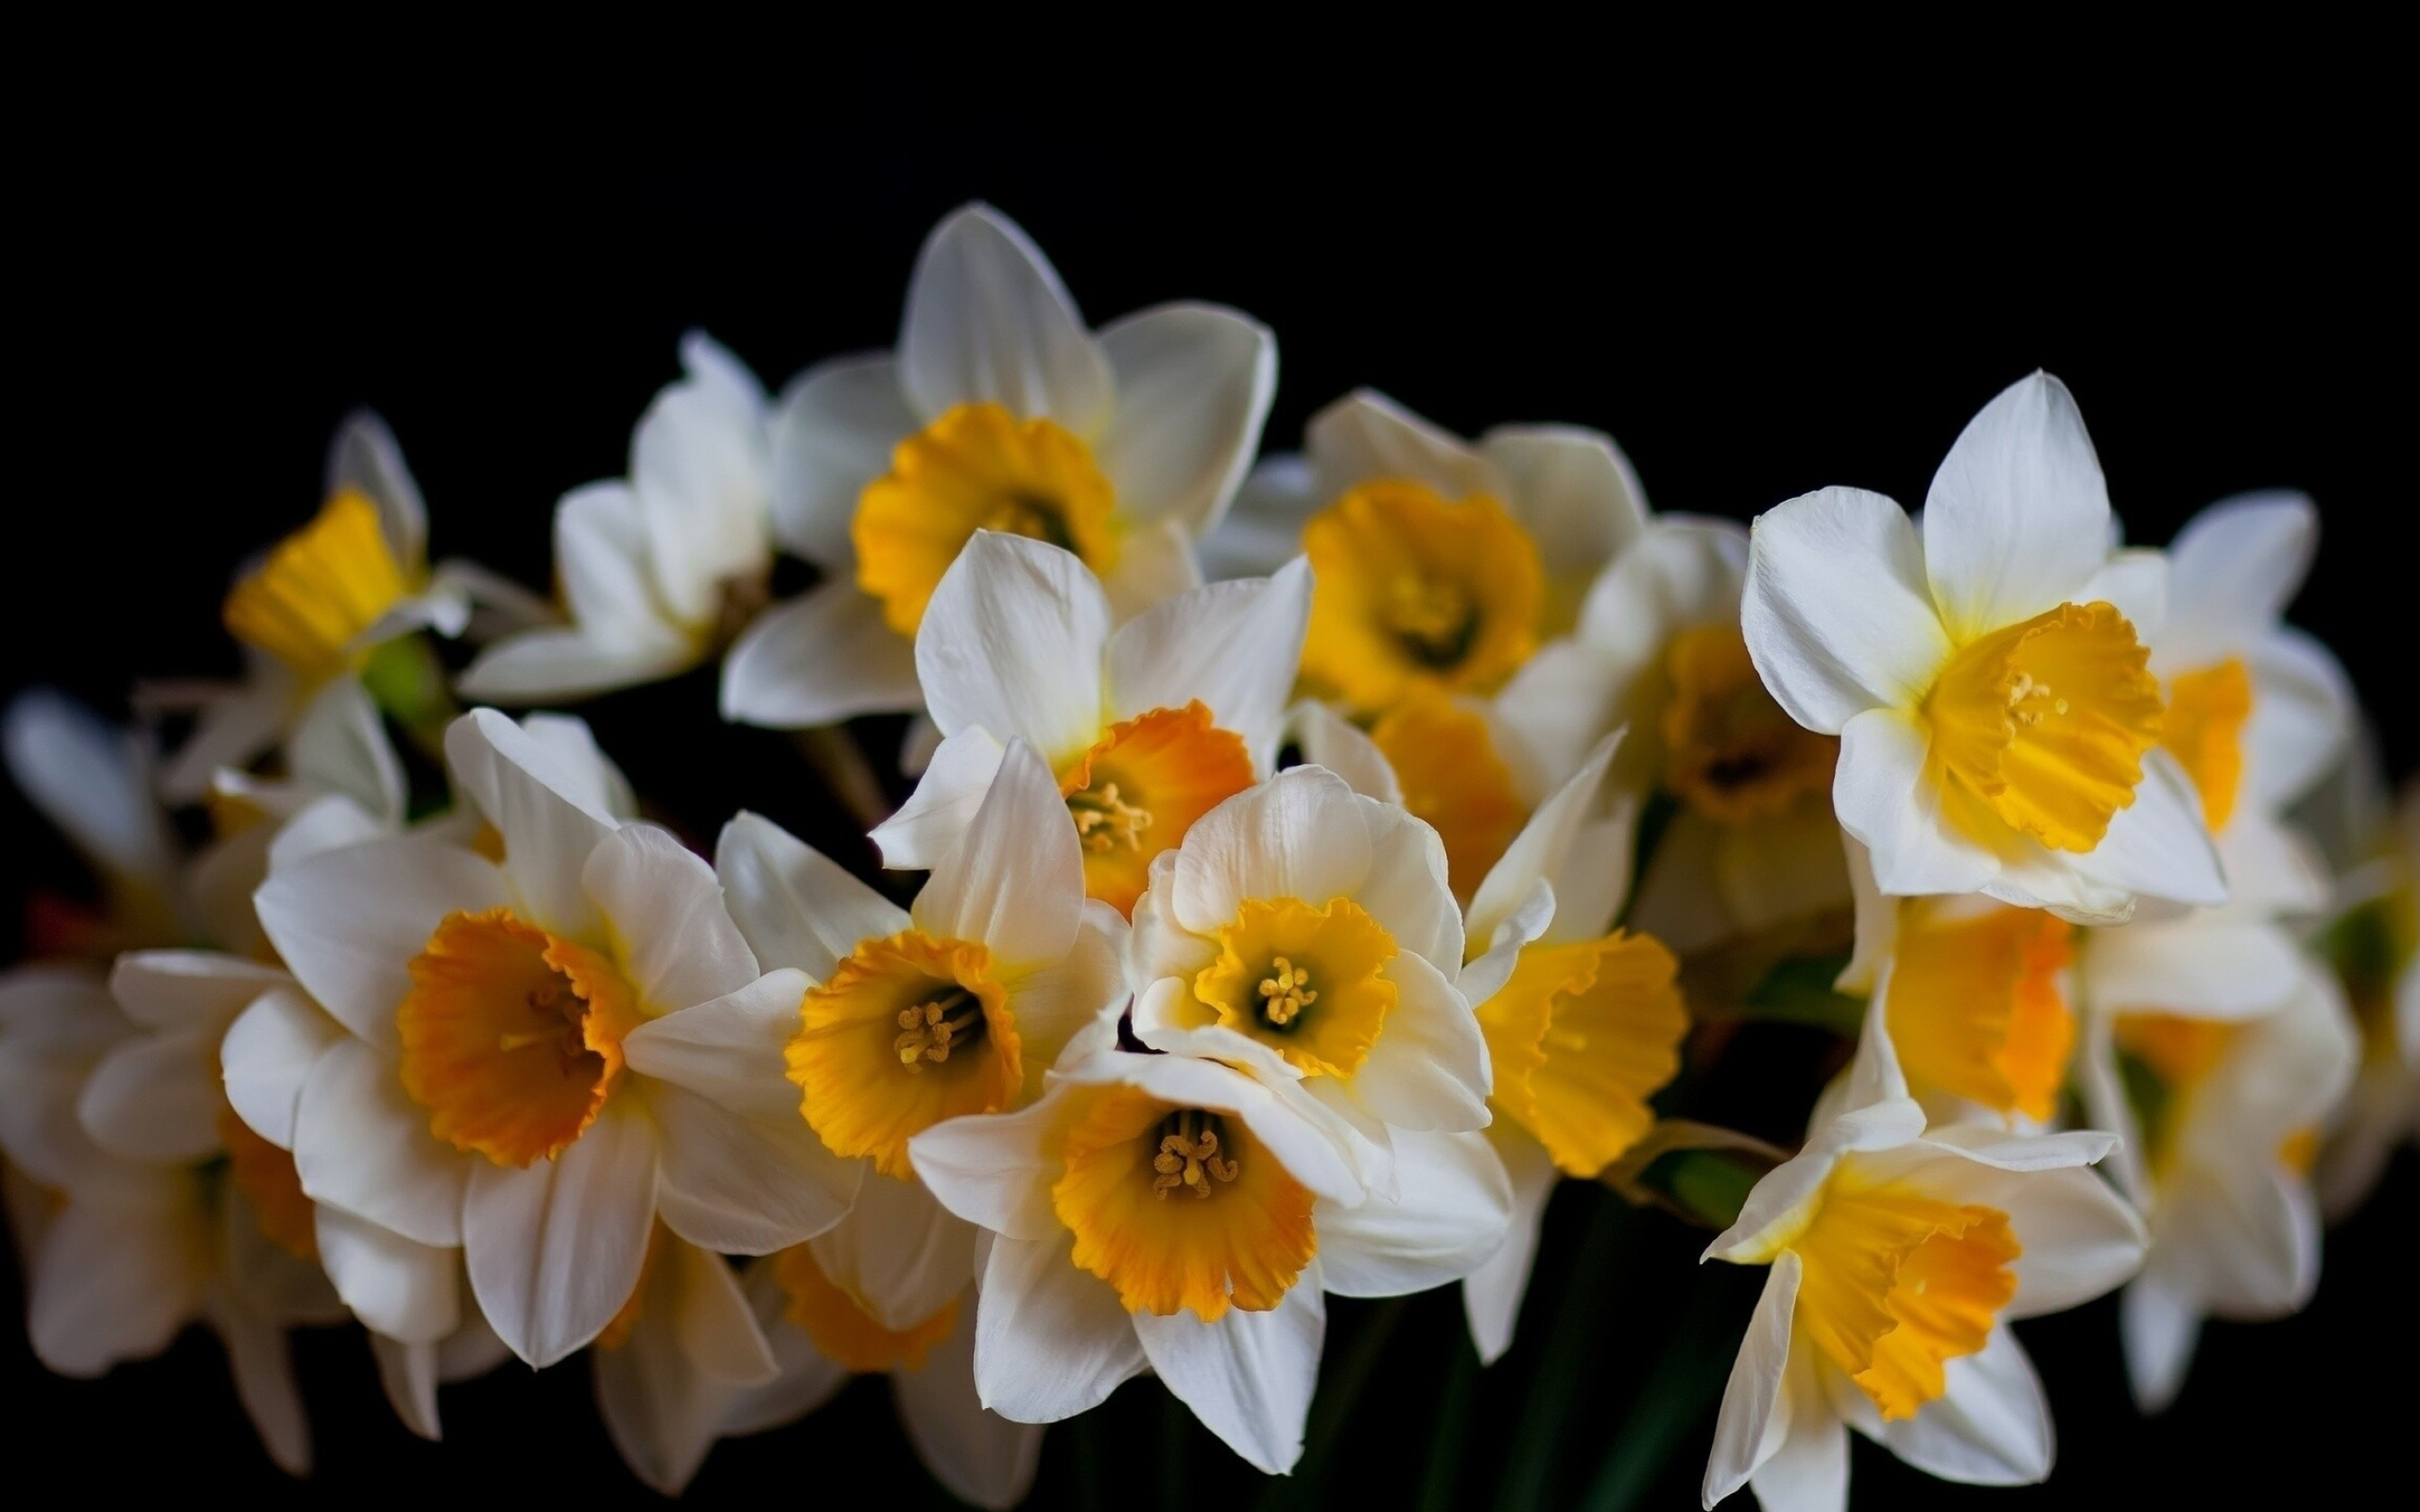 Daffodil: Daffodils with white and golden petals. 2560x1600 HD Wallpaper.